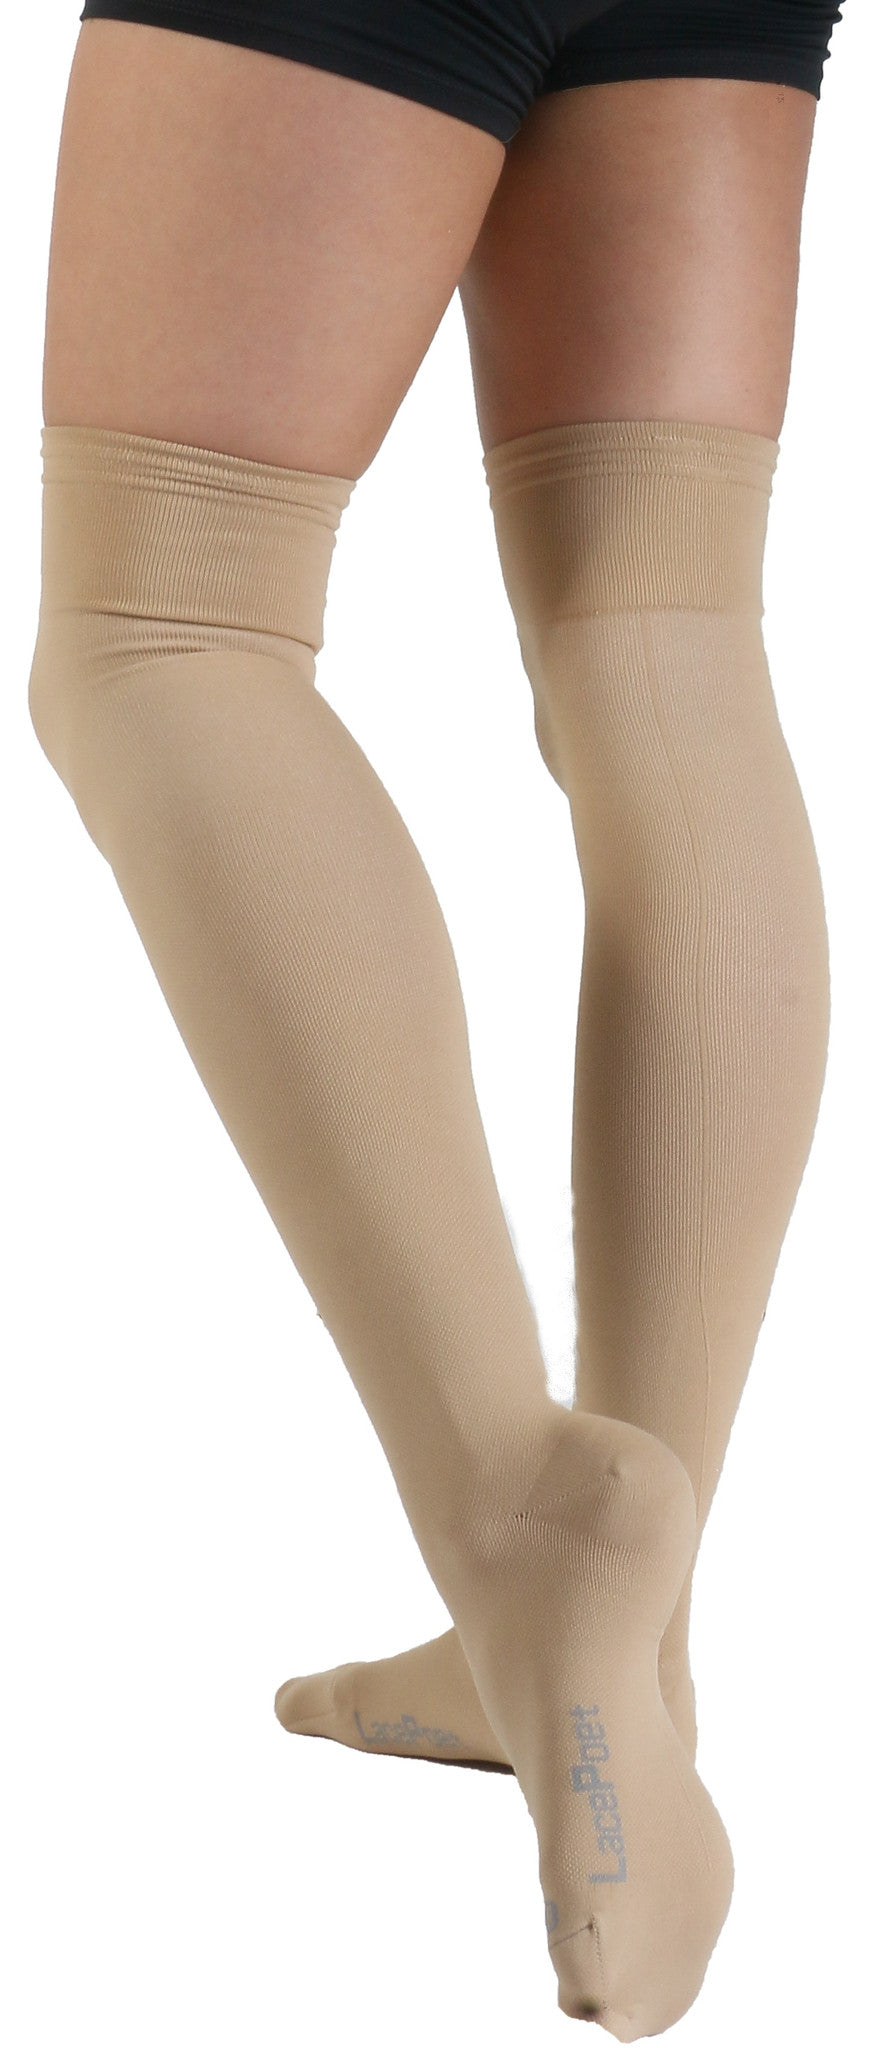 Lace Poet Surgical Over the Knee Compression Socks - TAN – LacePoet